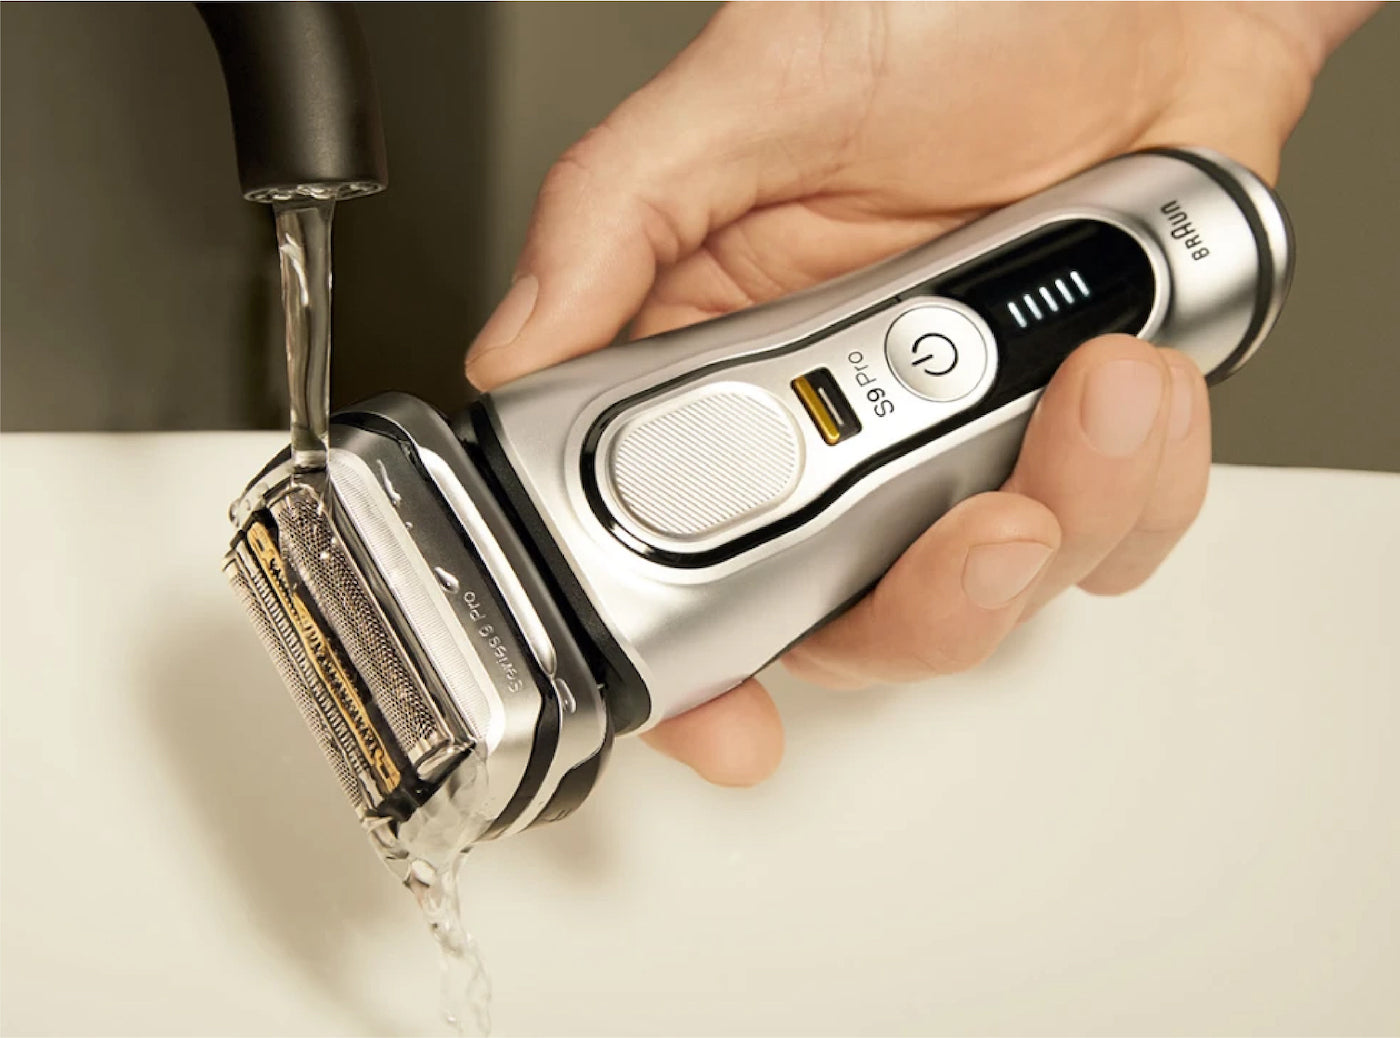 Easy steps to clean your electric shaver